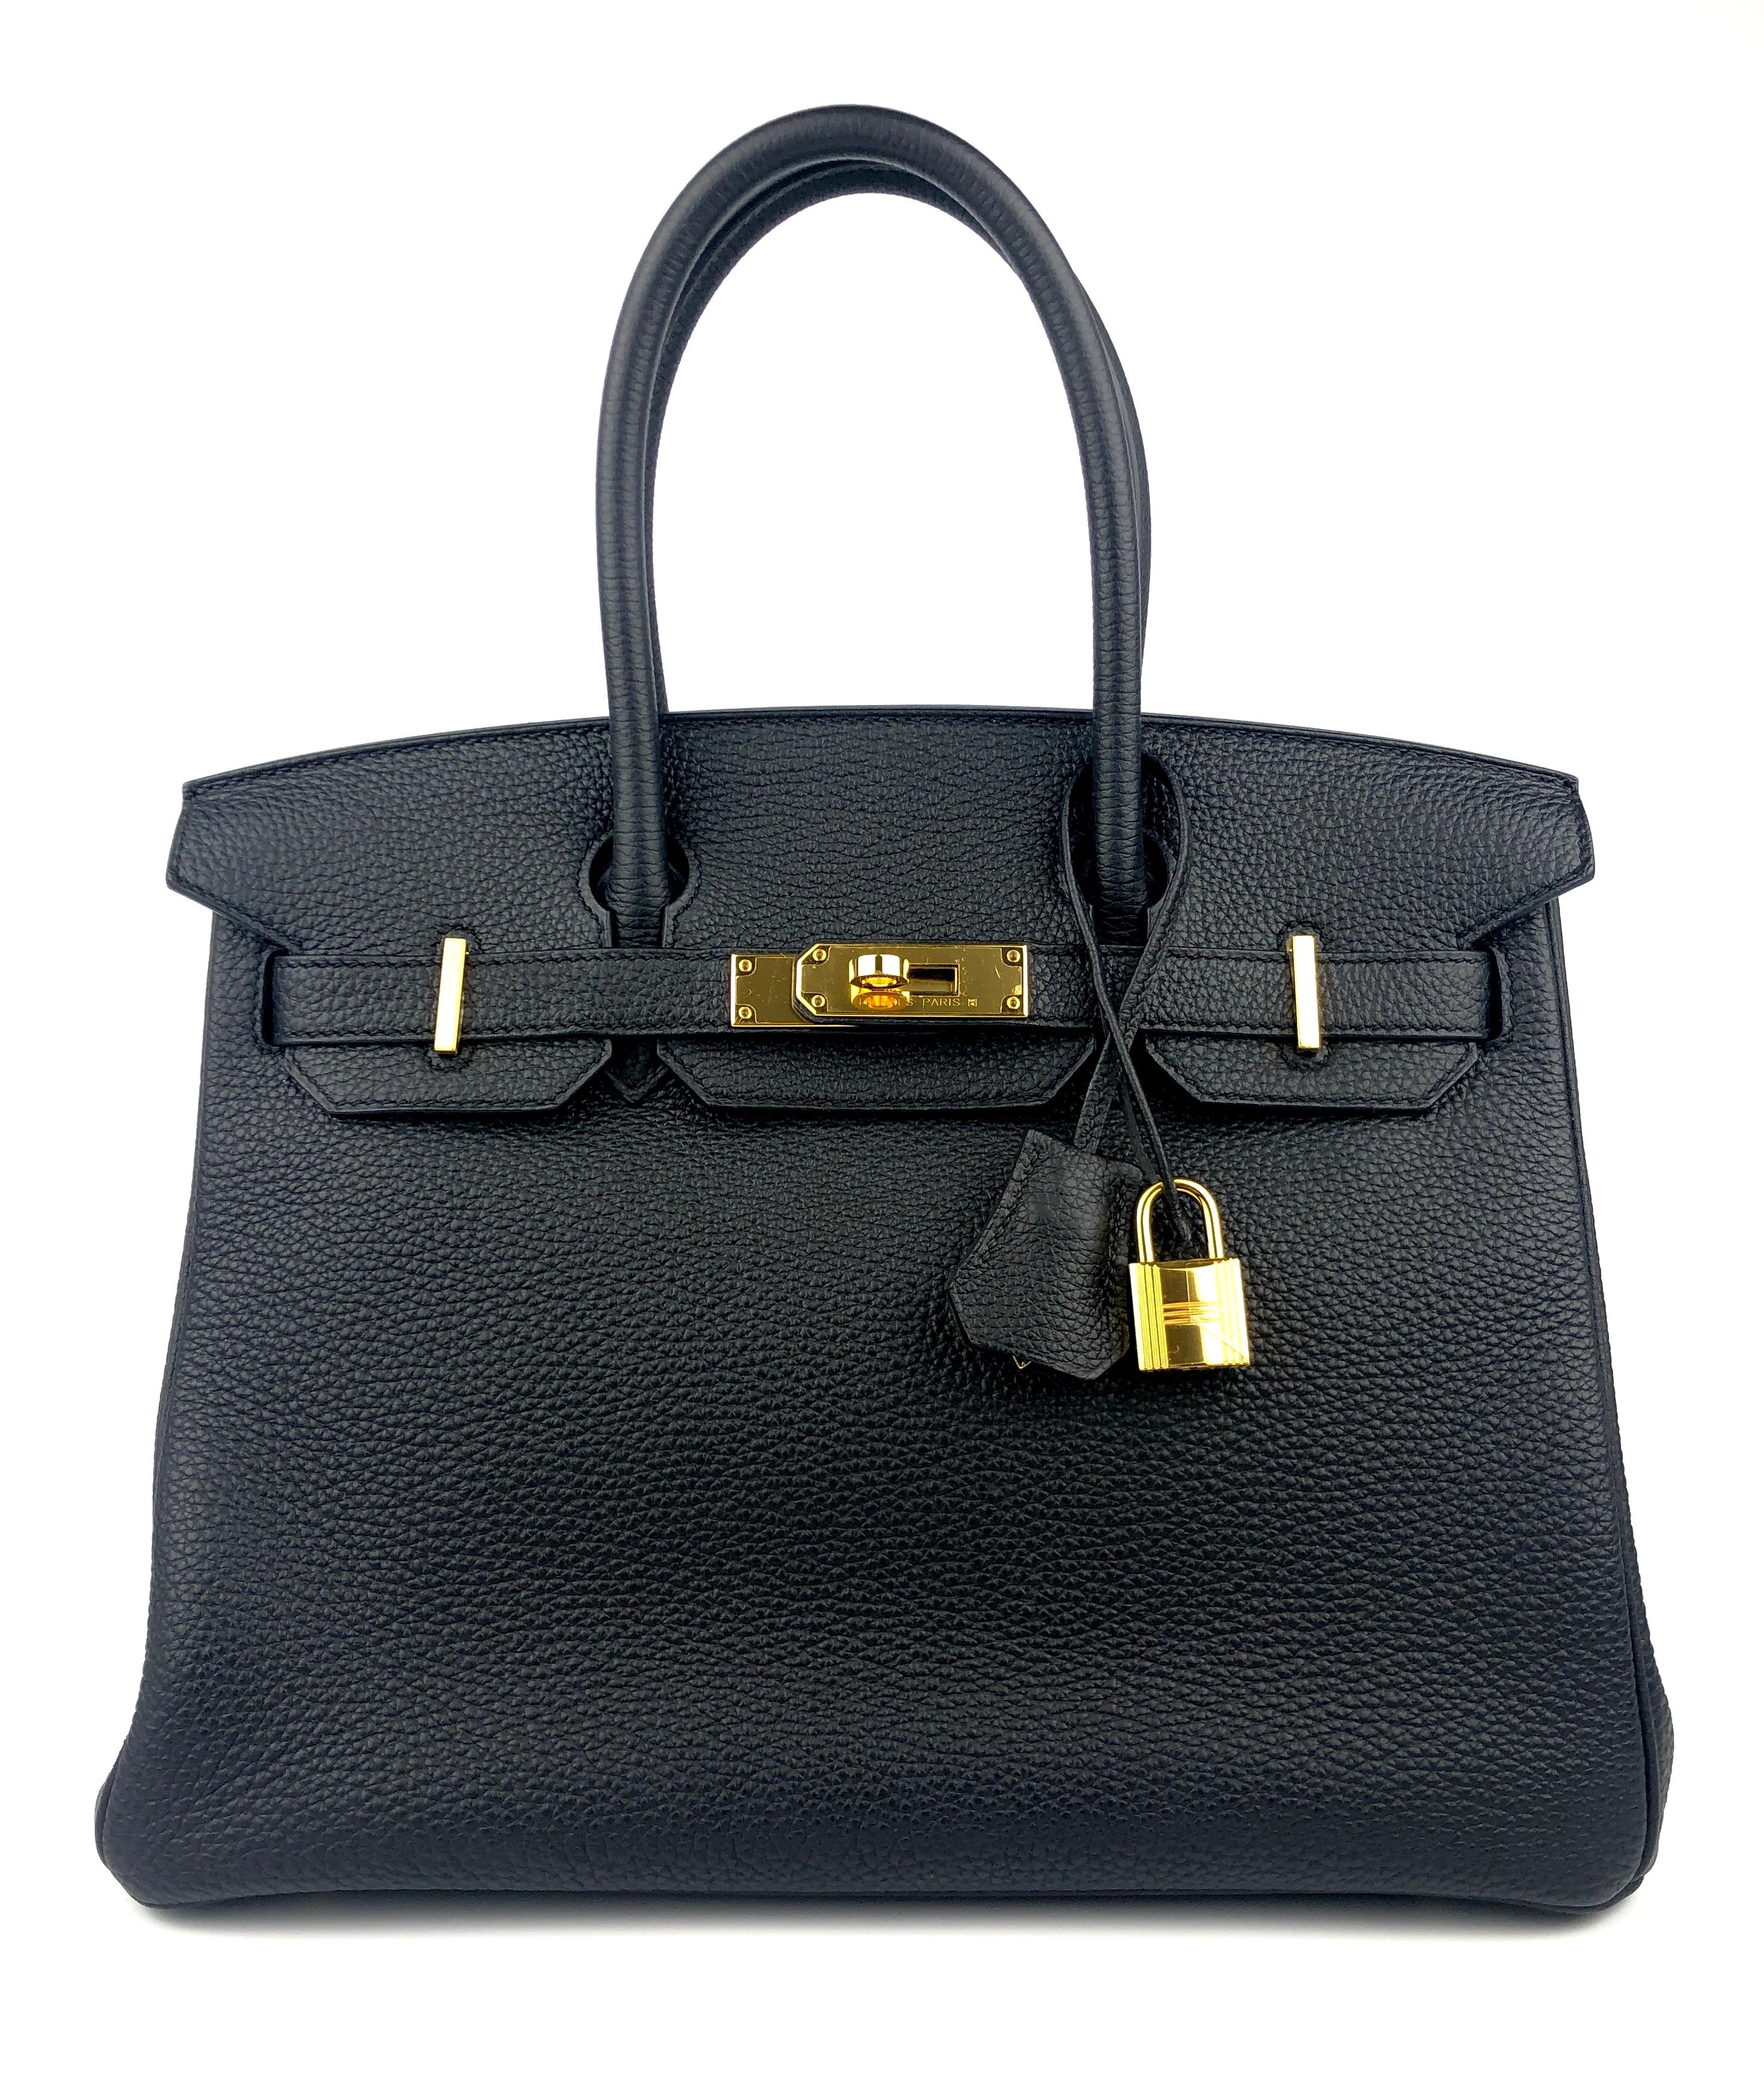 Absolutely Gorgeous Hermes Birkin 30 Black complimented by Gold Hardware. Excellent Pristine Condition with Plastic on Hardware. Excellent corners and Structure. 2018 C Stamp. 

Shop with Confidence from Lux Addicts. Authenticity Guaranteed! 